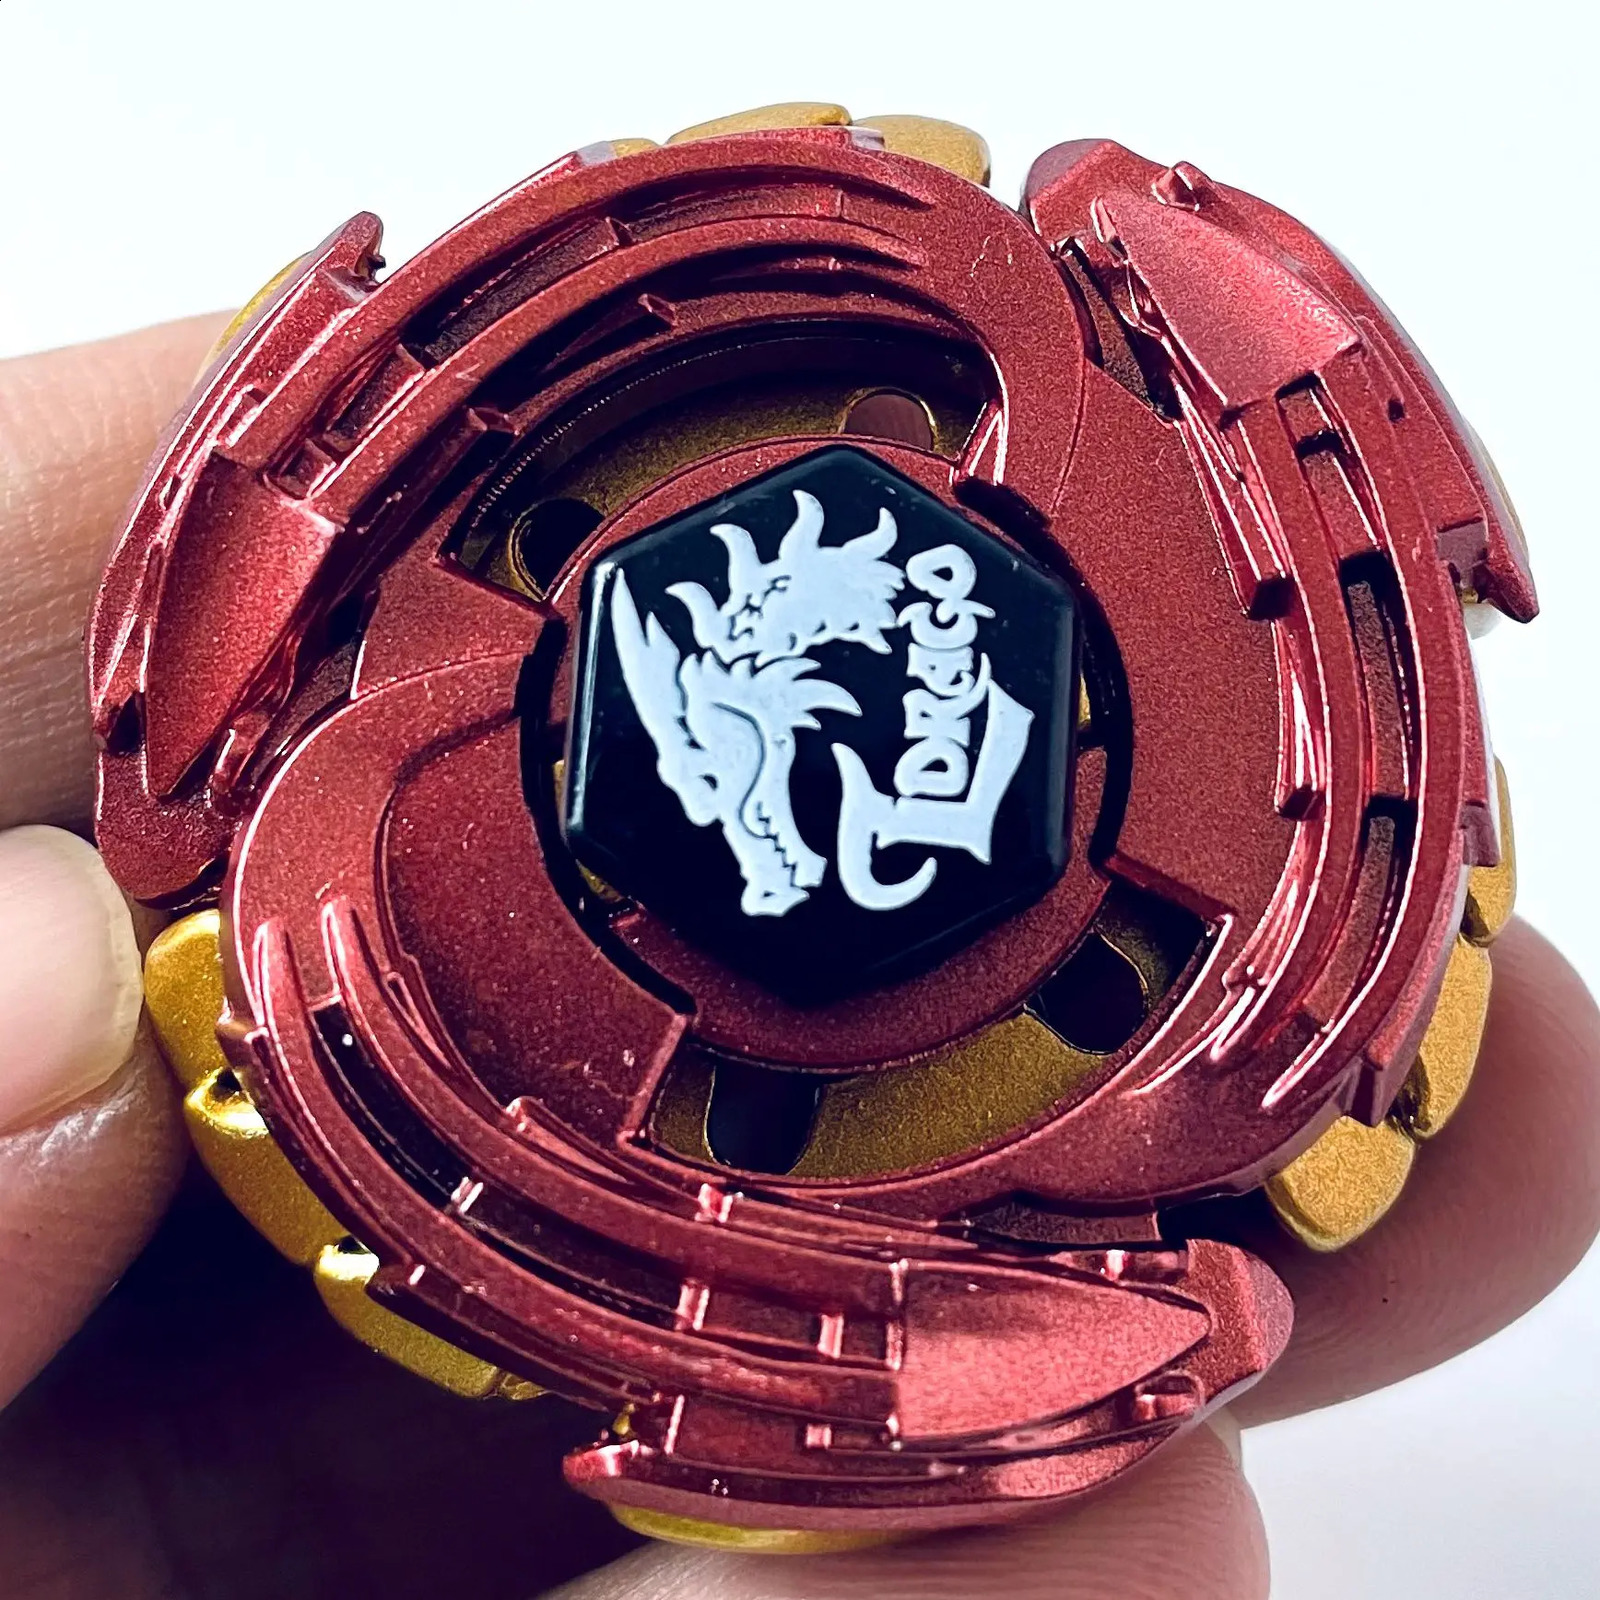 4D Tomy Beyblade Metal Fight Fusion Cosmic Pegasus Collectible Anime Beys Toy 240127